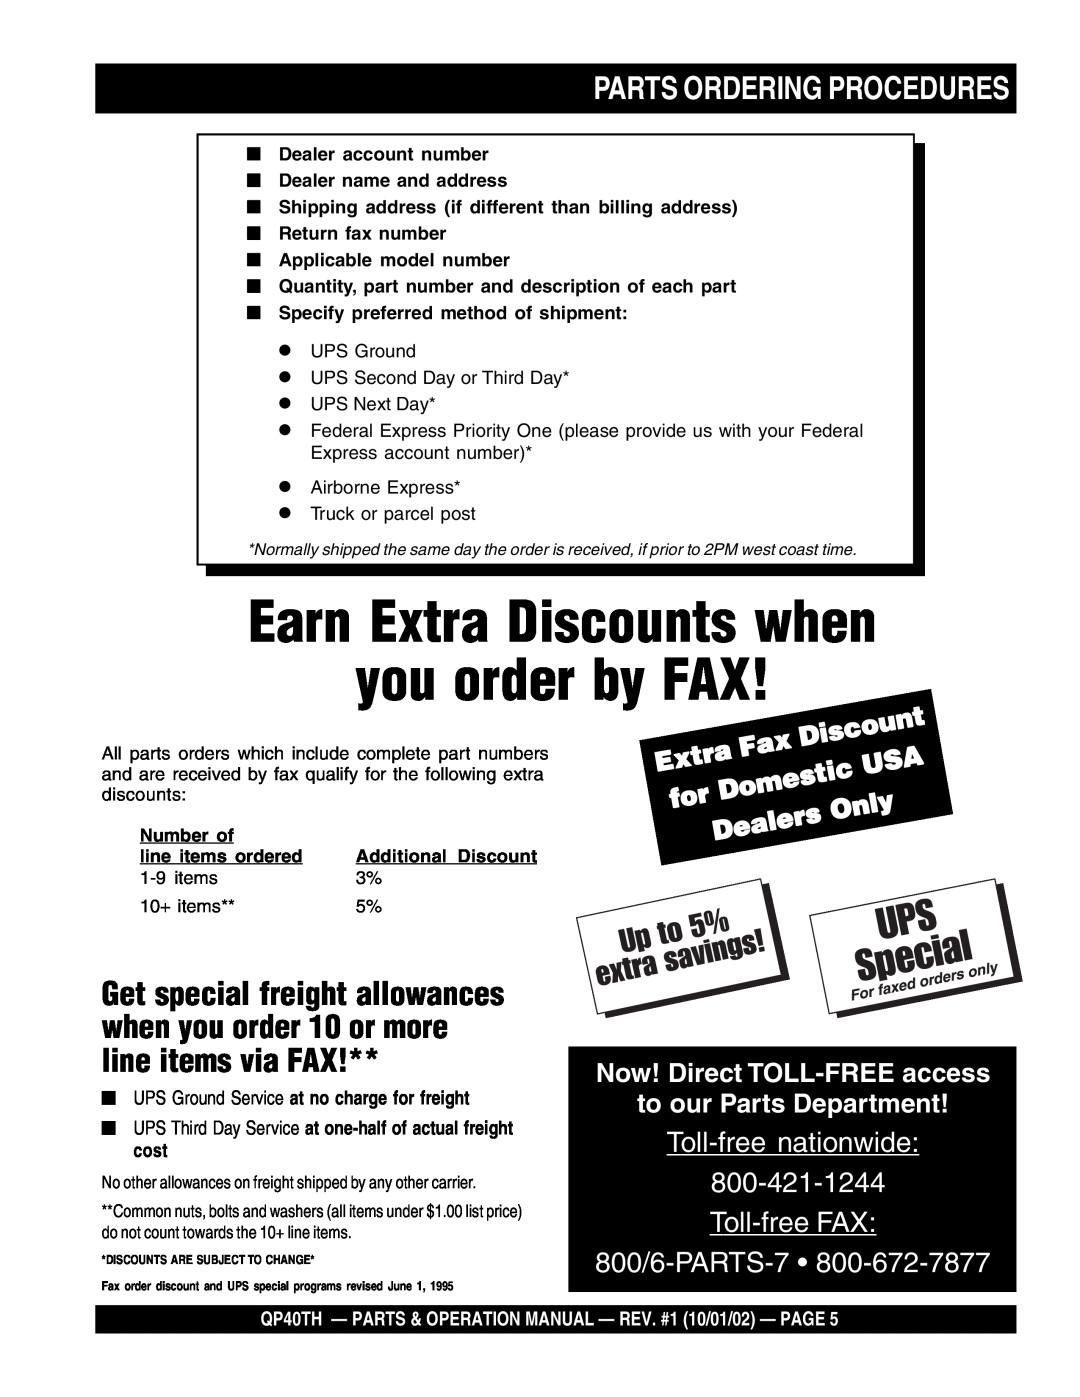 Multiquip QP40TH Earn Extra Discounts when you order by FAX, Parts Ordering Procedures, Domestic, Dealers, Only 